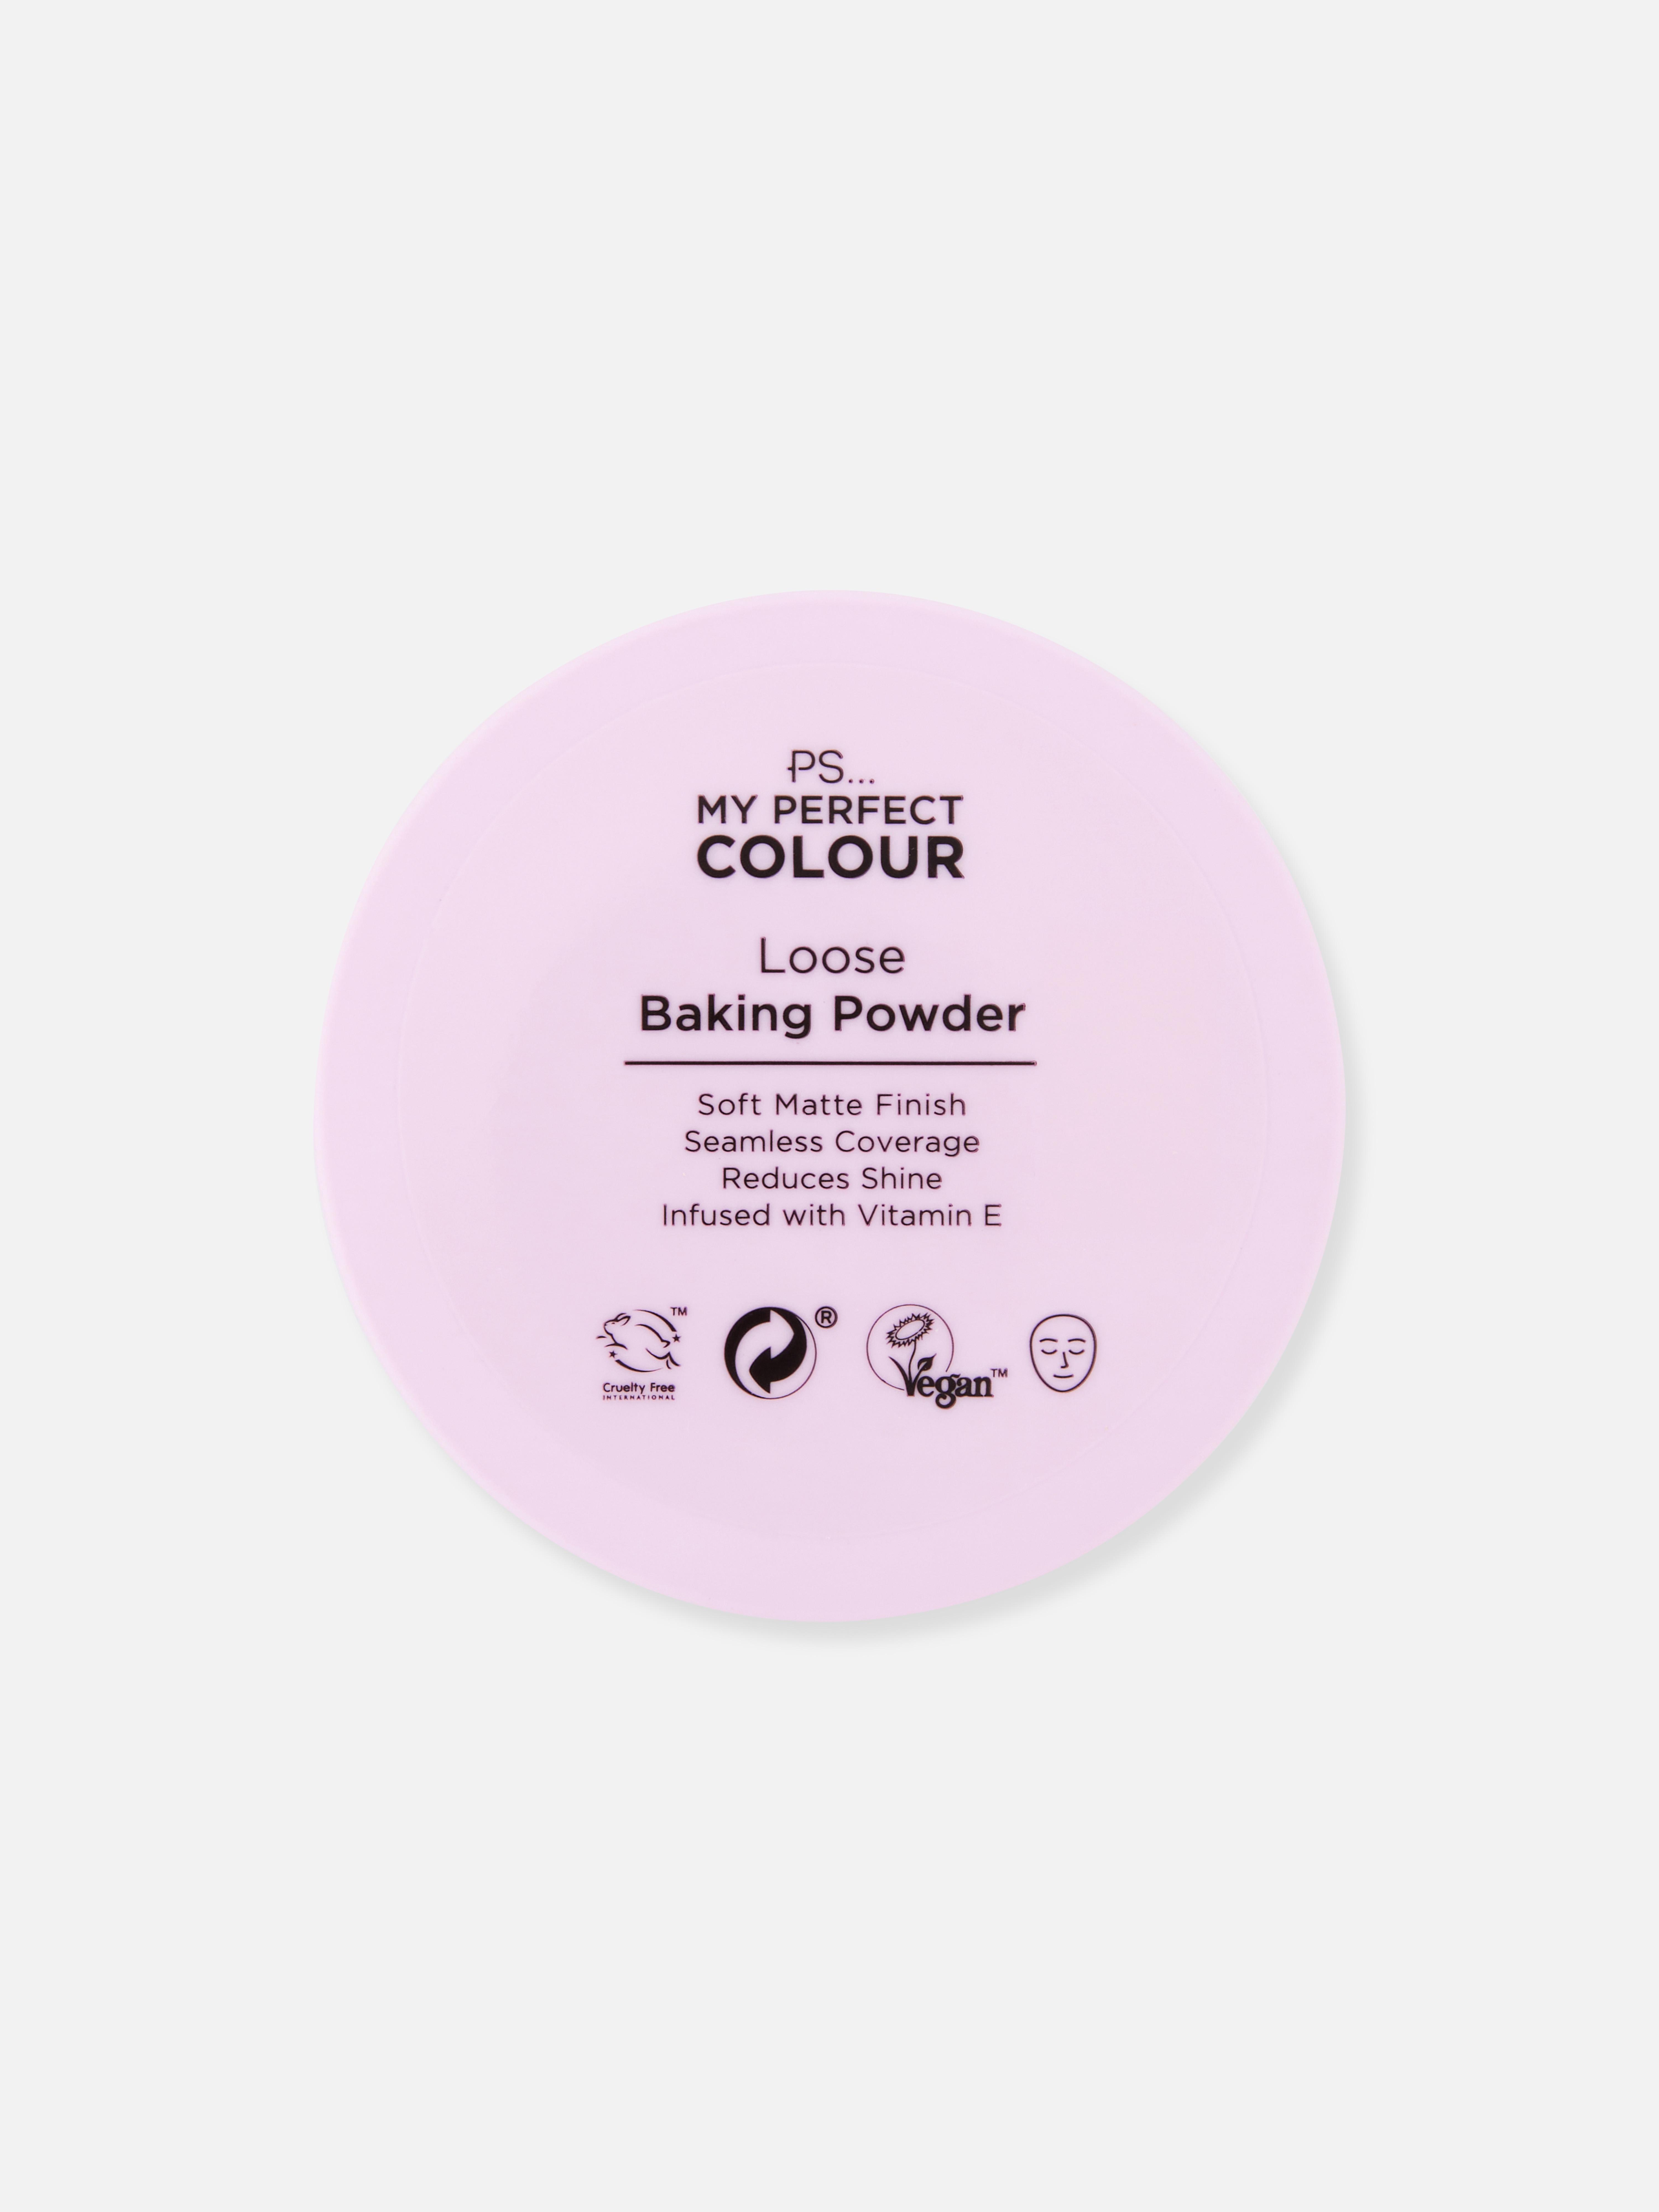 PS... My Perfect Colour Loose Baking Powder